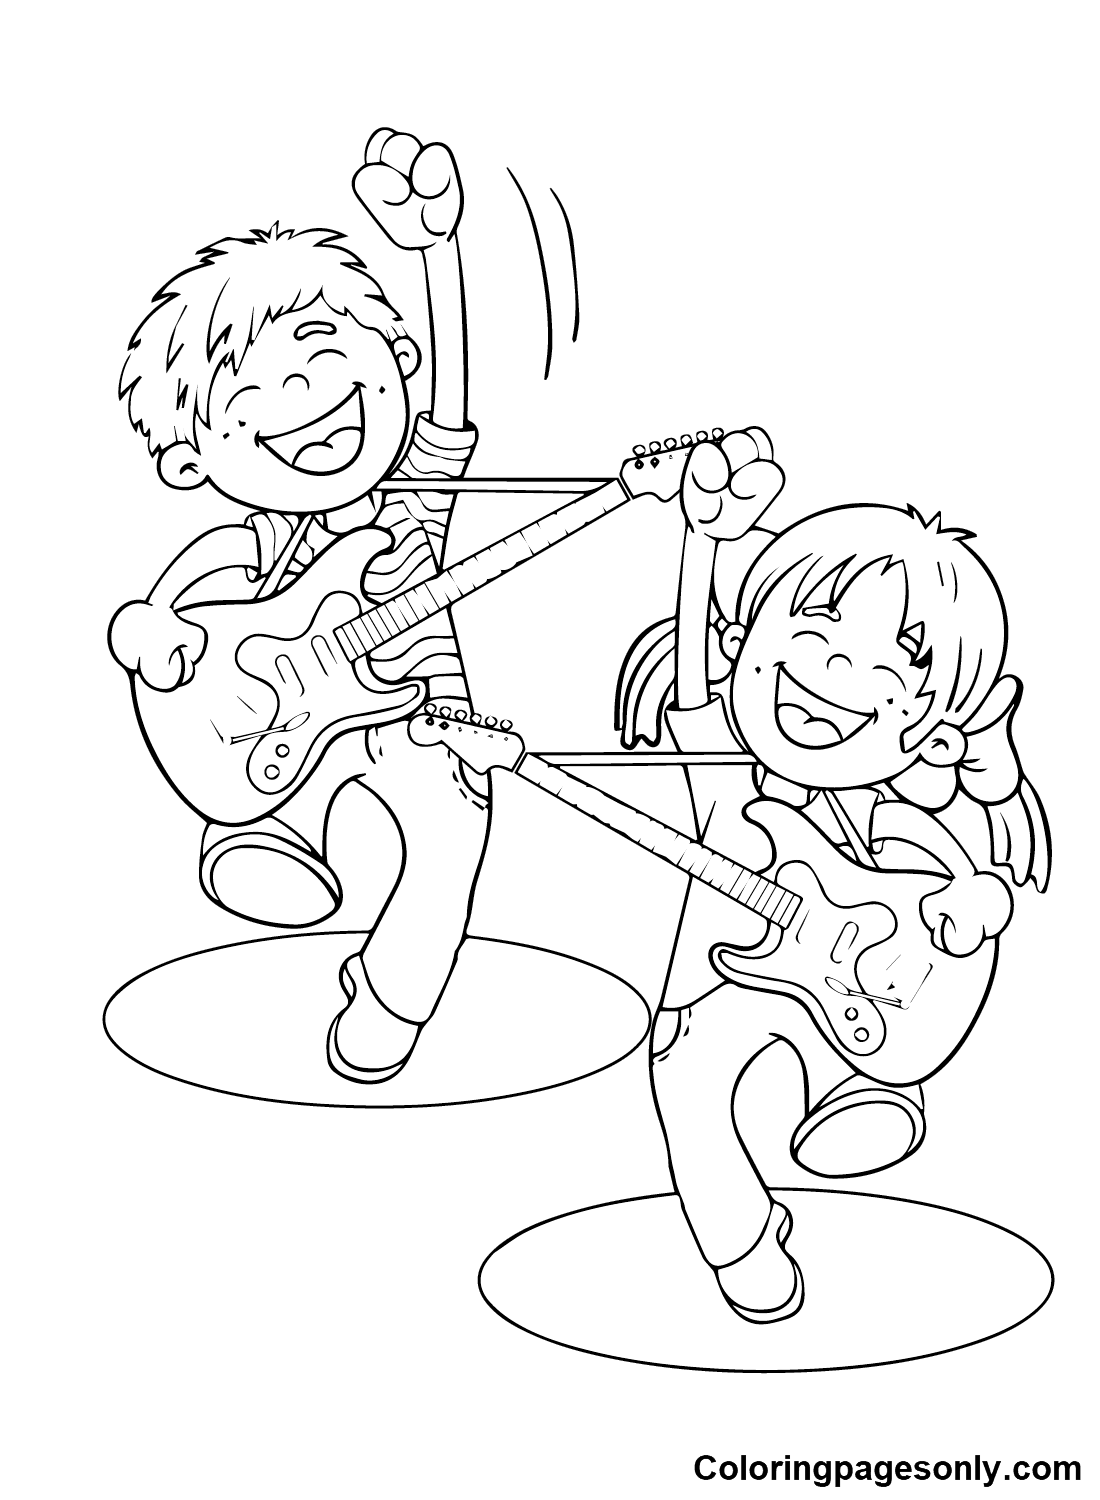 Happy Children with Guitar Coloring Pages